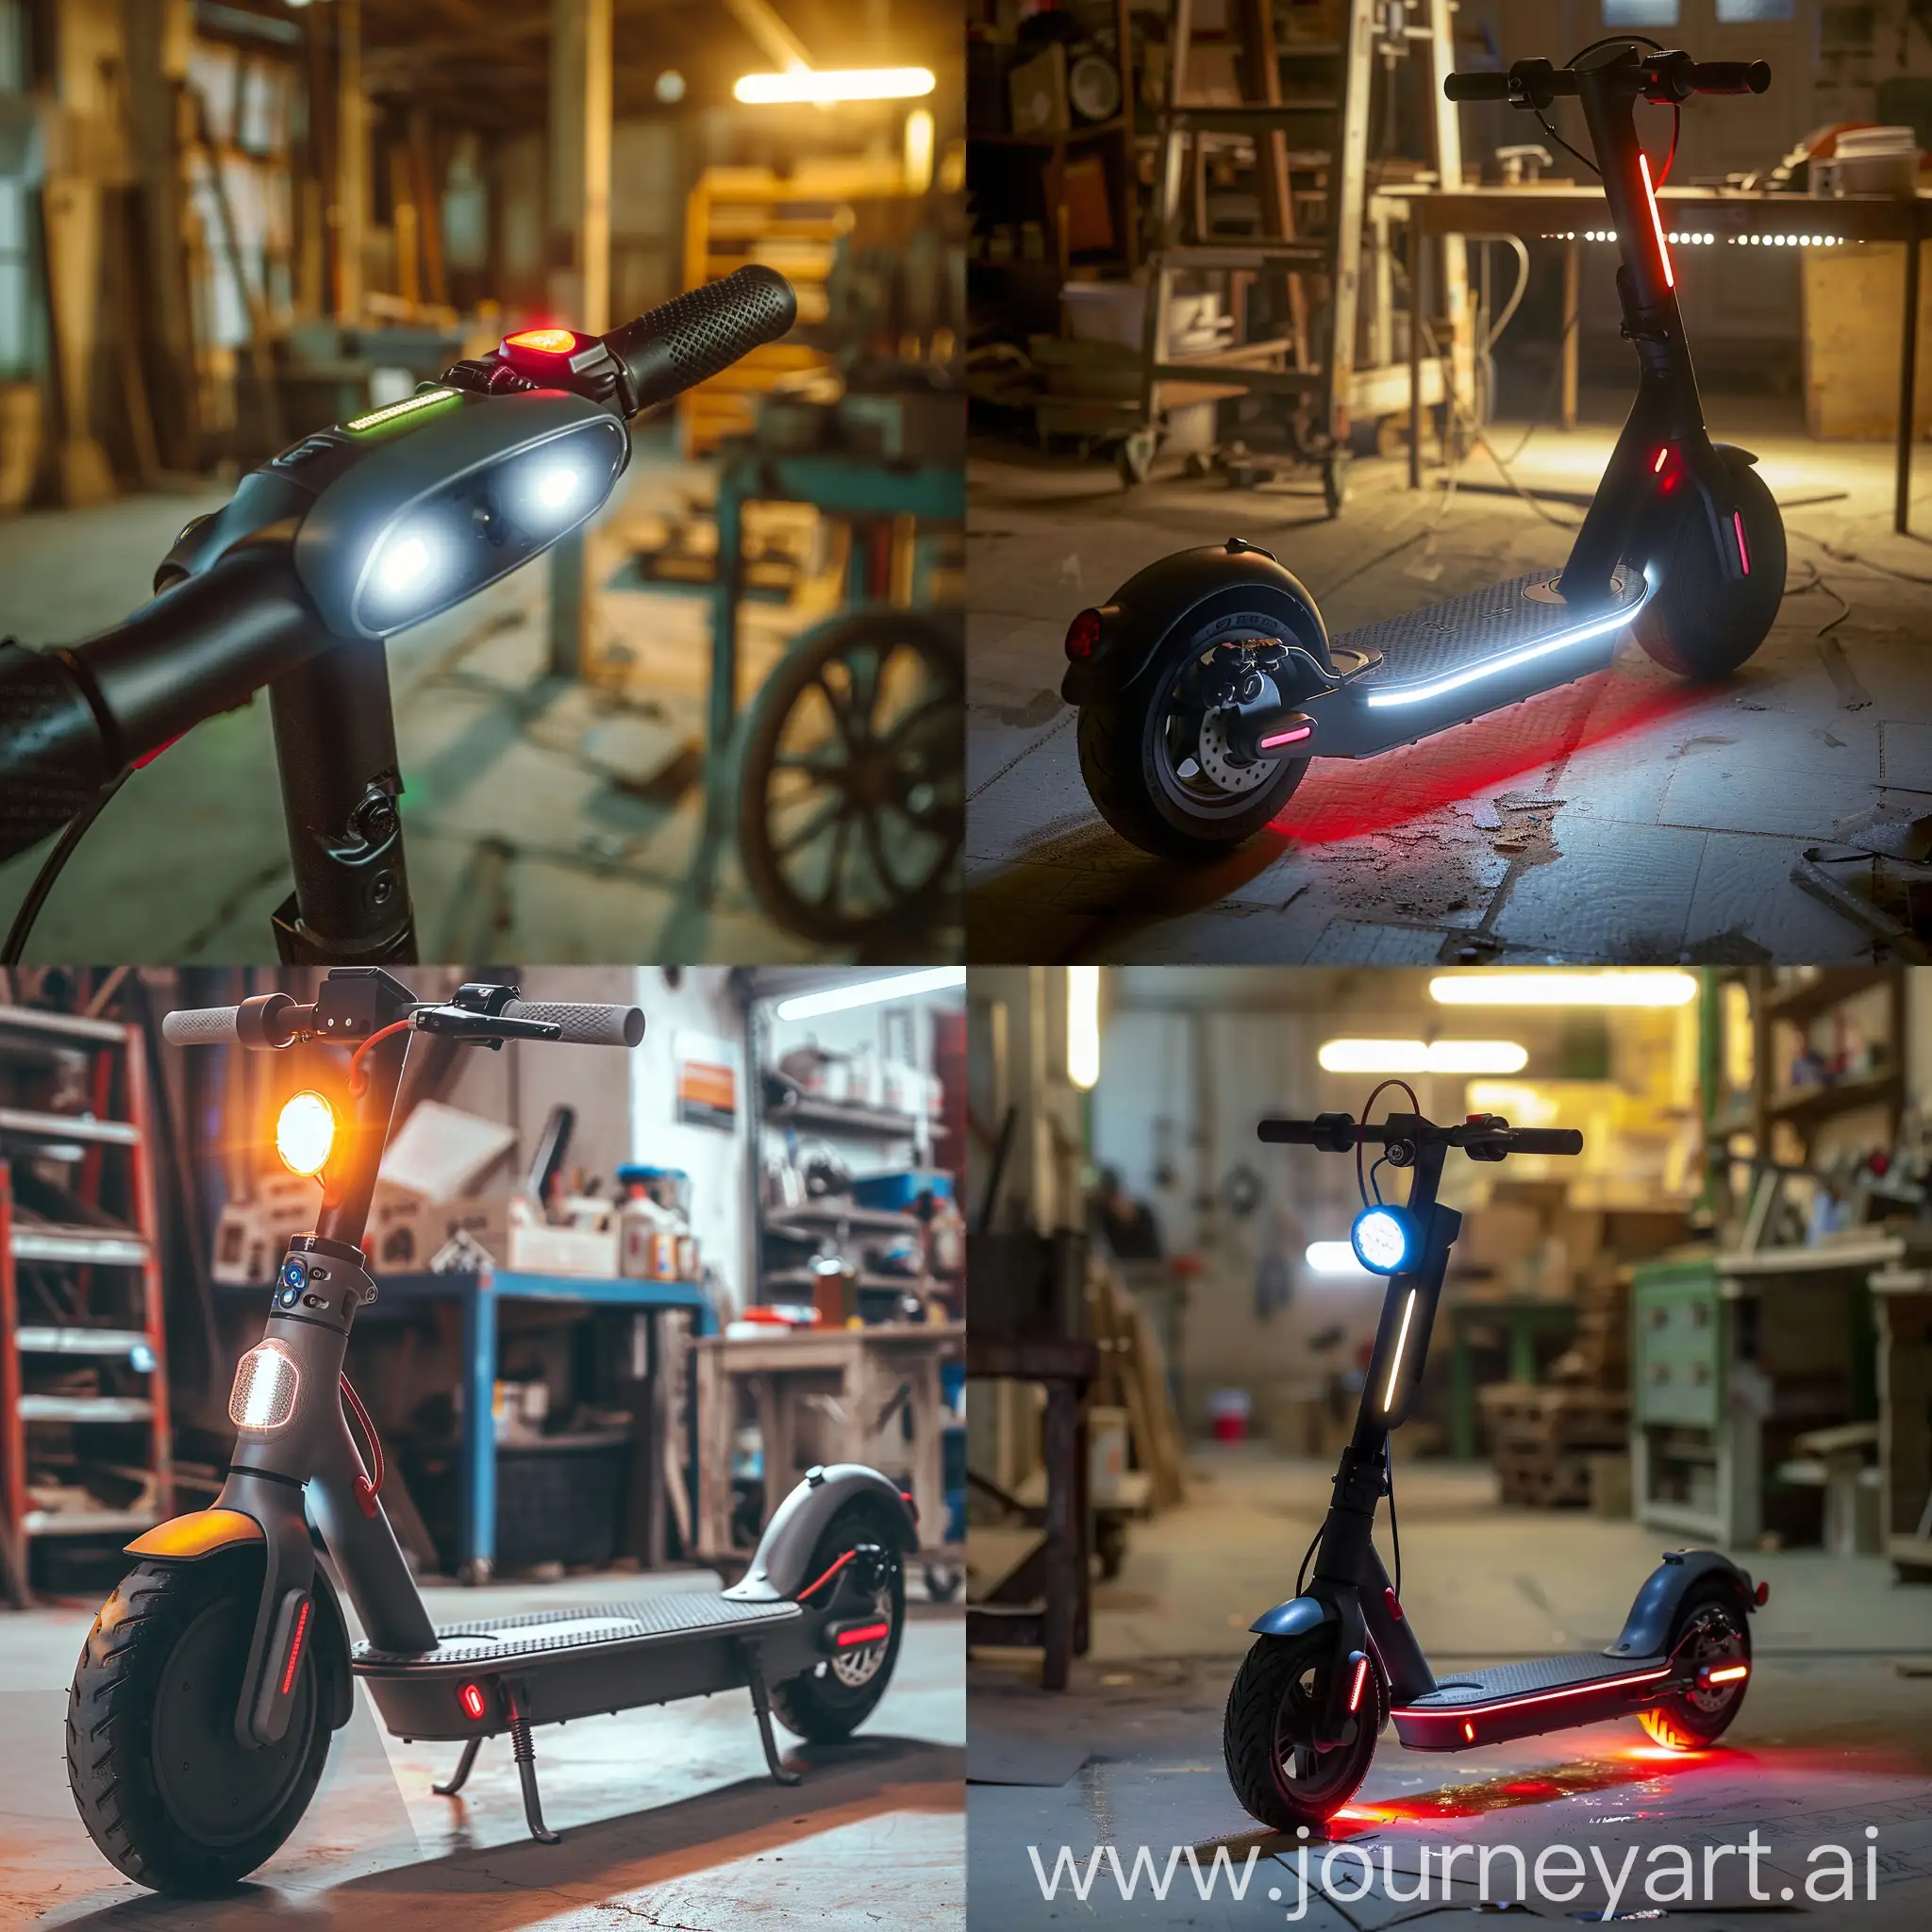 Electric-Scooter-with-Backlight-and-Ignition-Key-in-Workshop